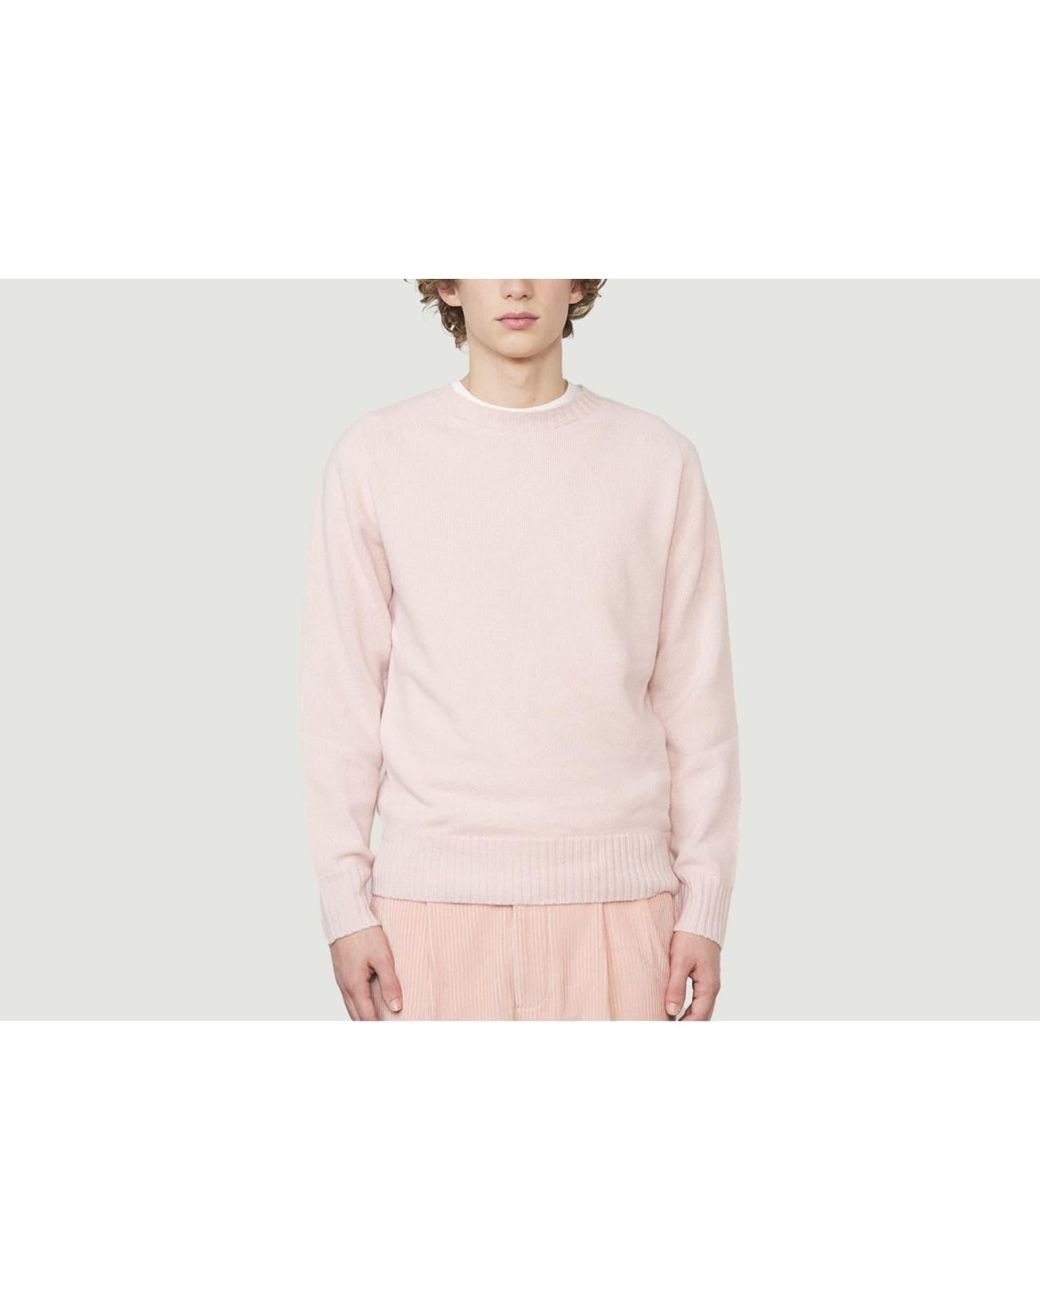 Officine Generale Seamless Cashmere Sweater in Pink for Men | Lyst